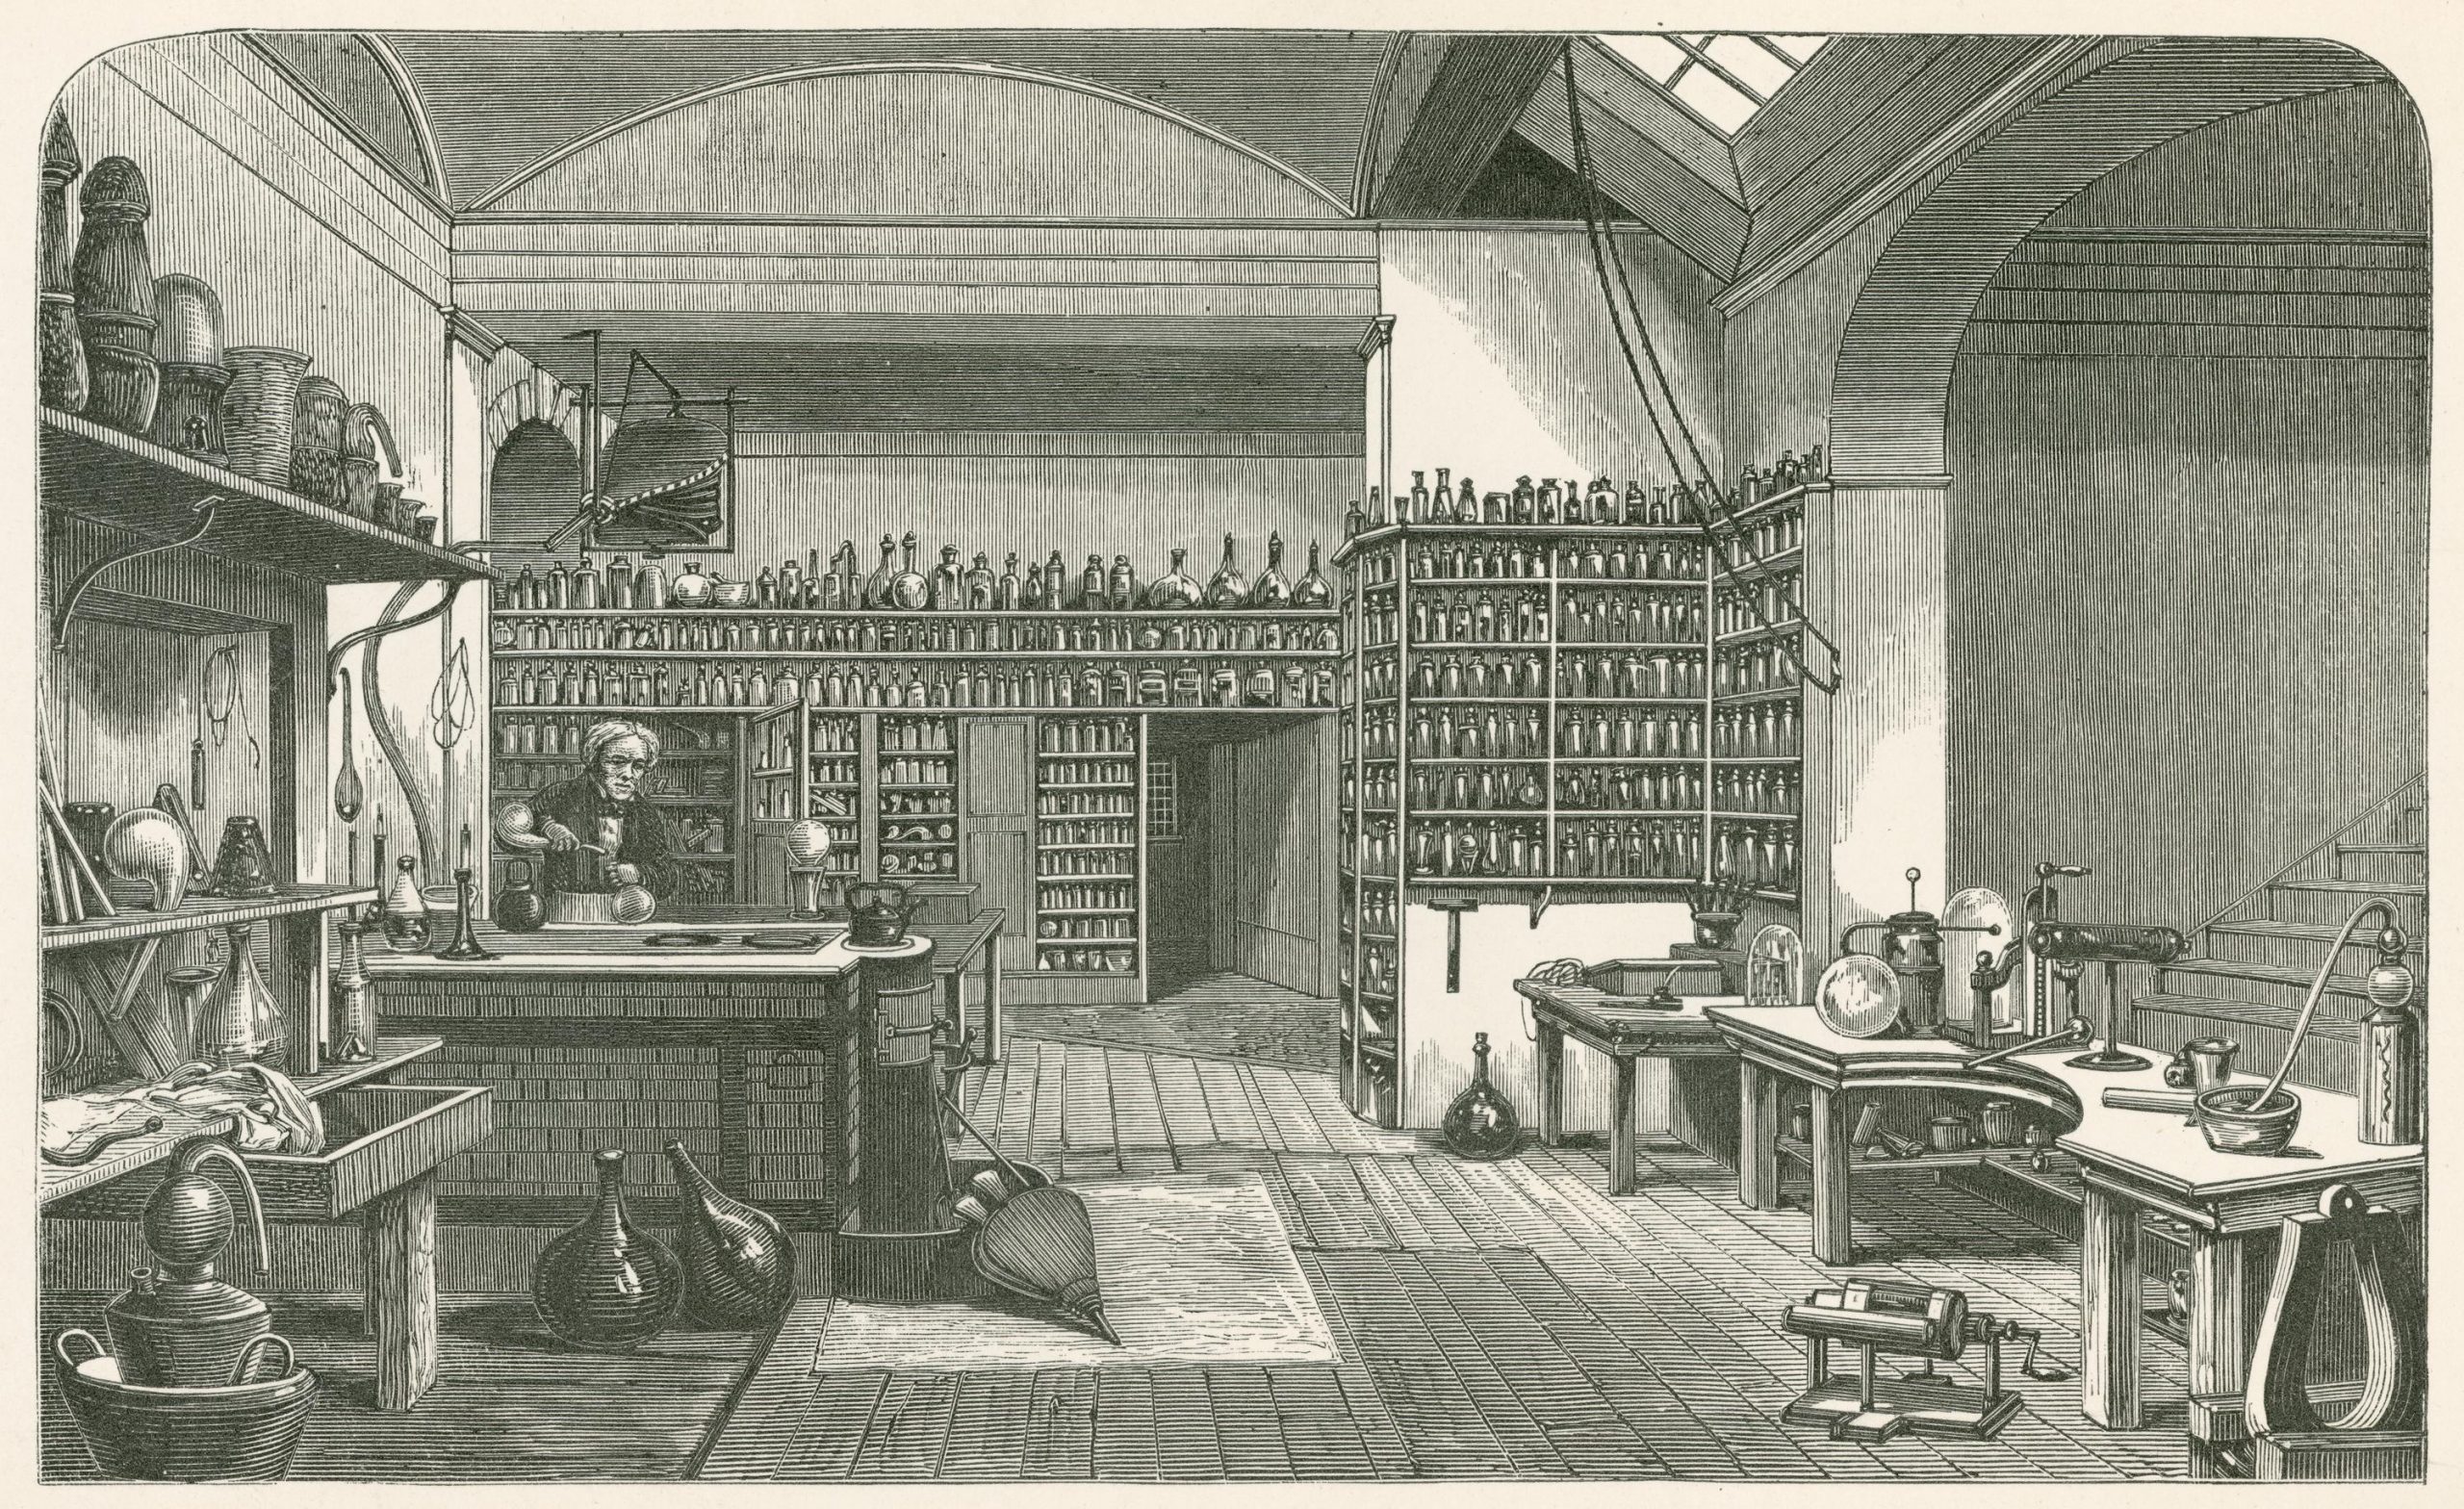 Faraday in his laboratory at the Royal Institution